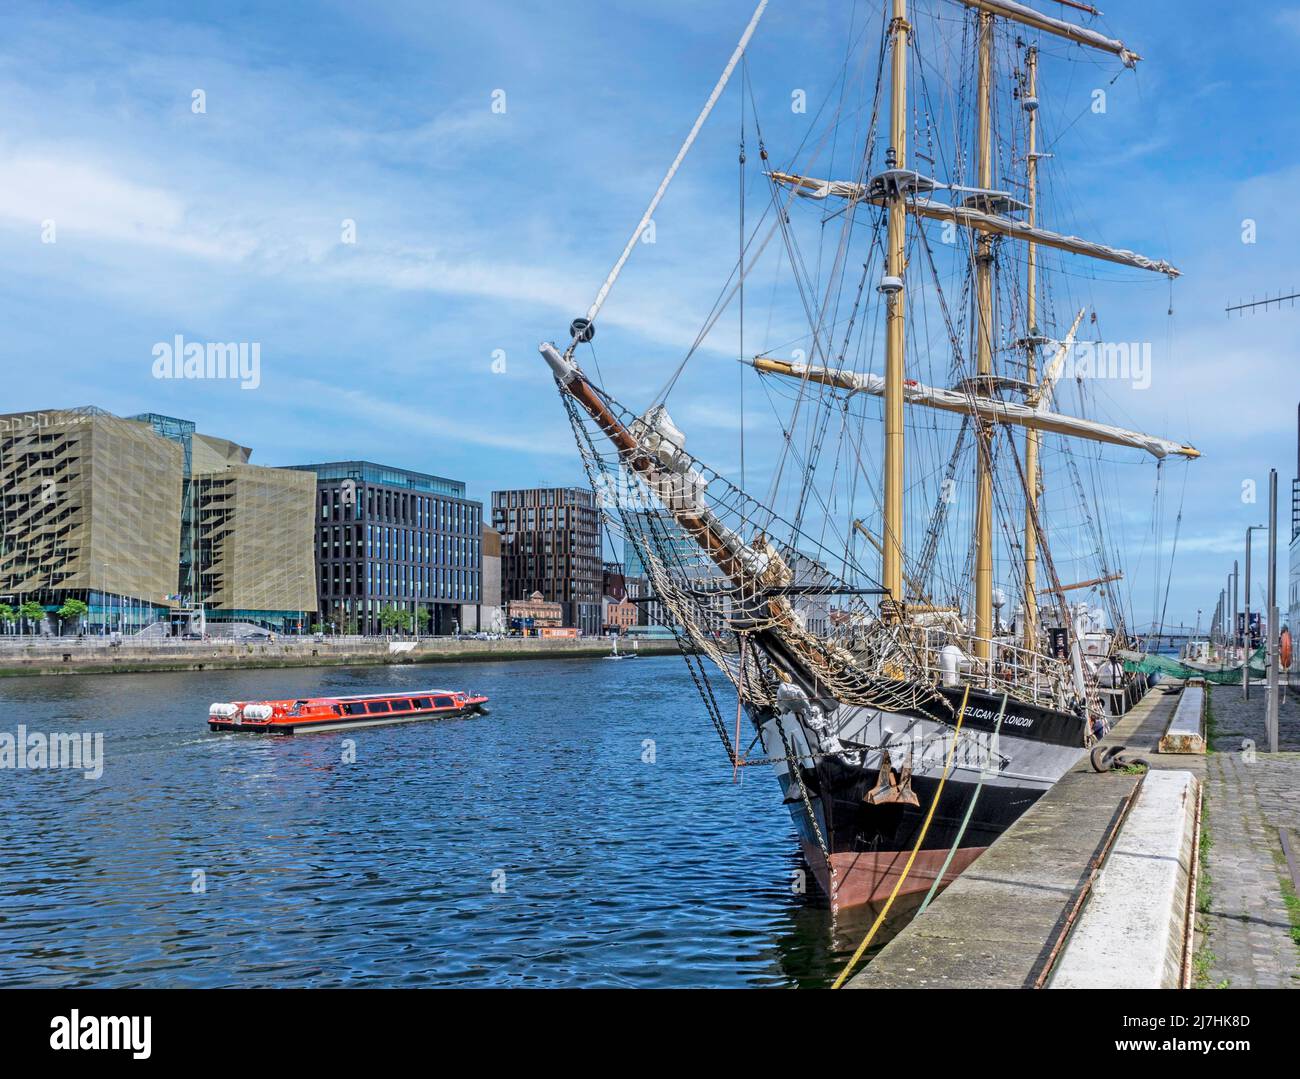 The tall ship Pelican of London pictured here against the modern office buildings of Dublin Docklands as a sightseeing tour passes by. Stock Photo